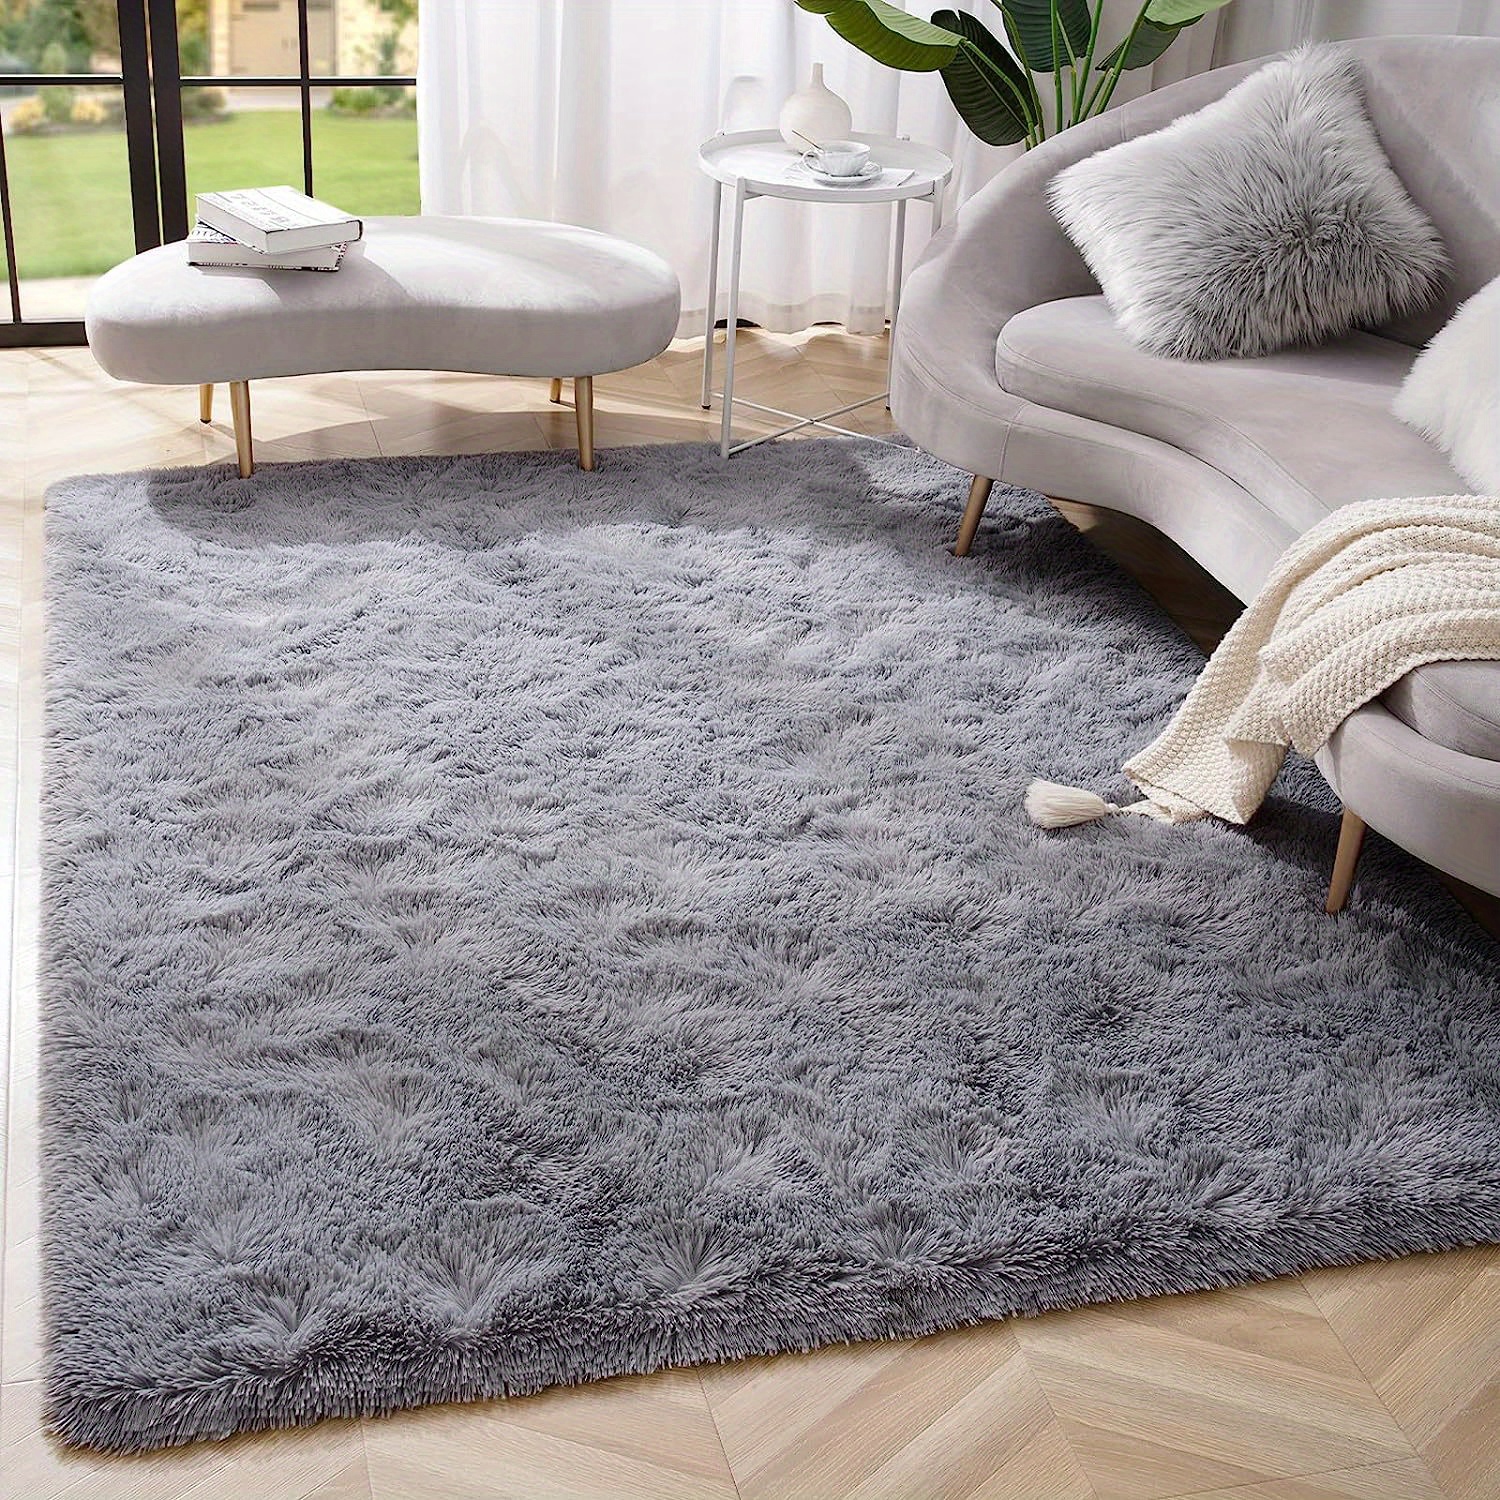 TABAYON Shaggy Ivory Rug, 2x3 Area Rugs for Living Room, Anti-Skid Extra  Comfy Fluffy Floor Carpet for Indoor Home Decorative